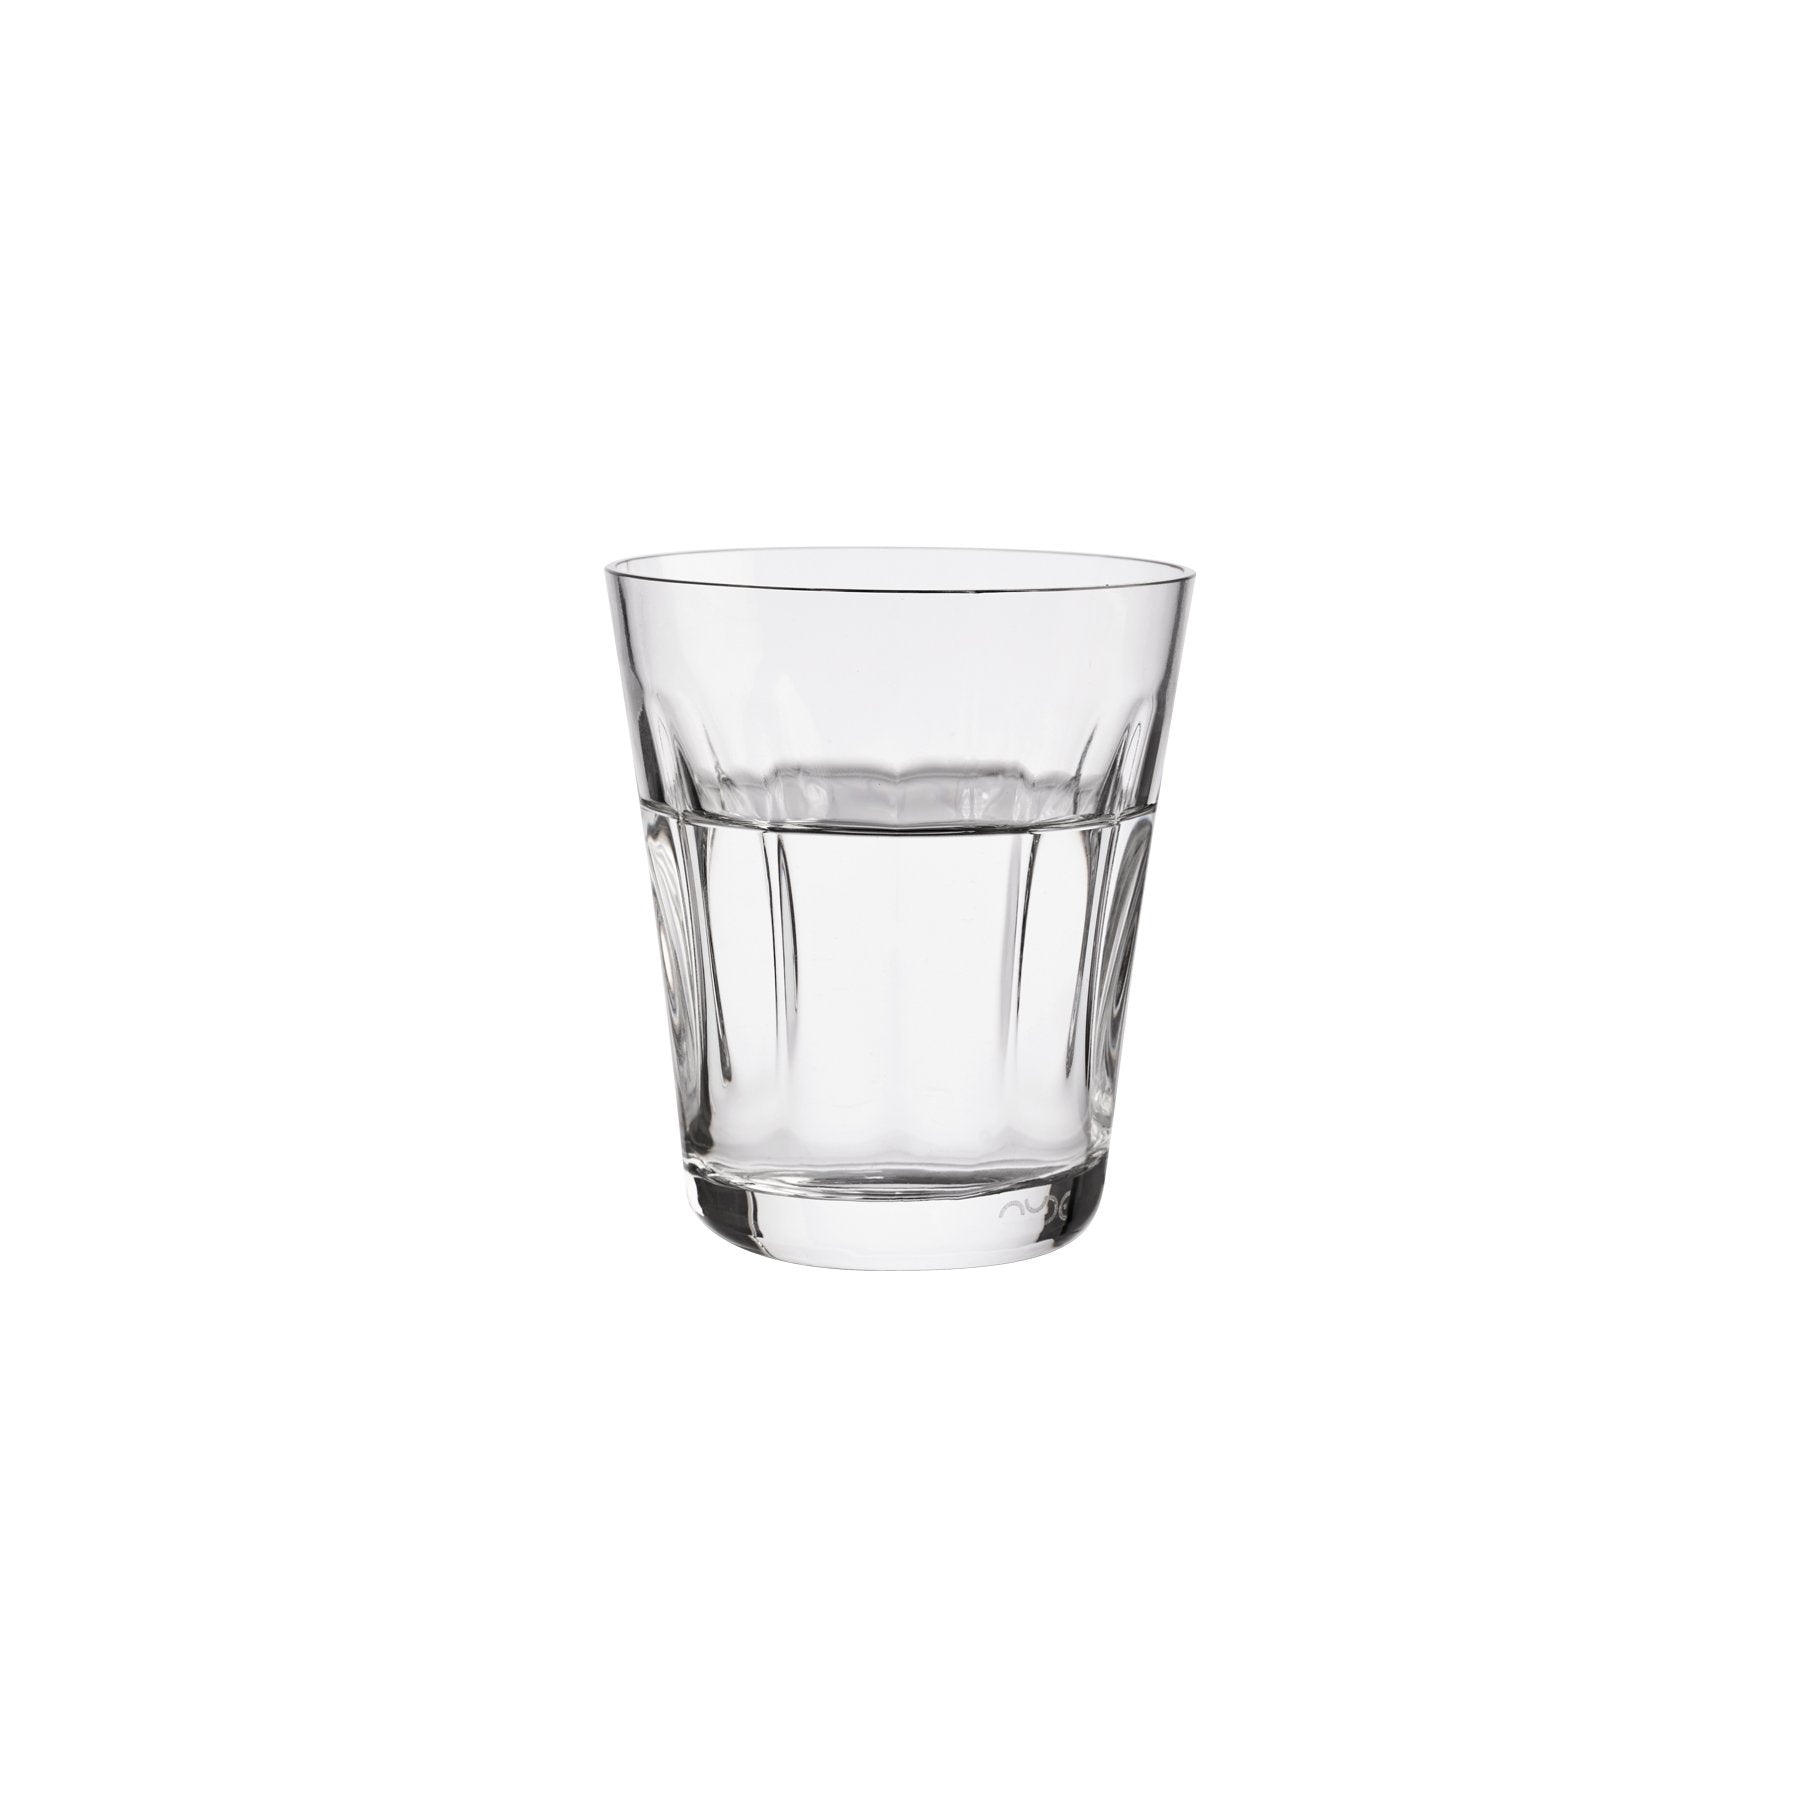 NUDE Lady leadfree crystal tumbler in clear filled with water